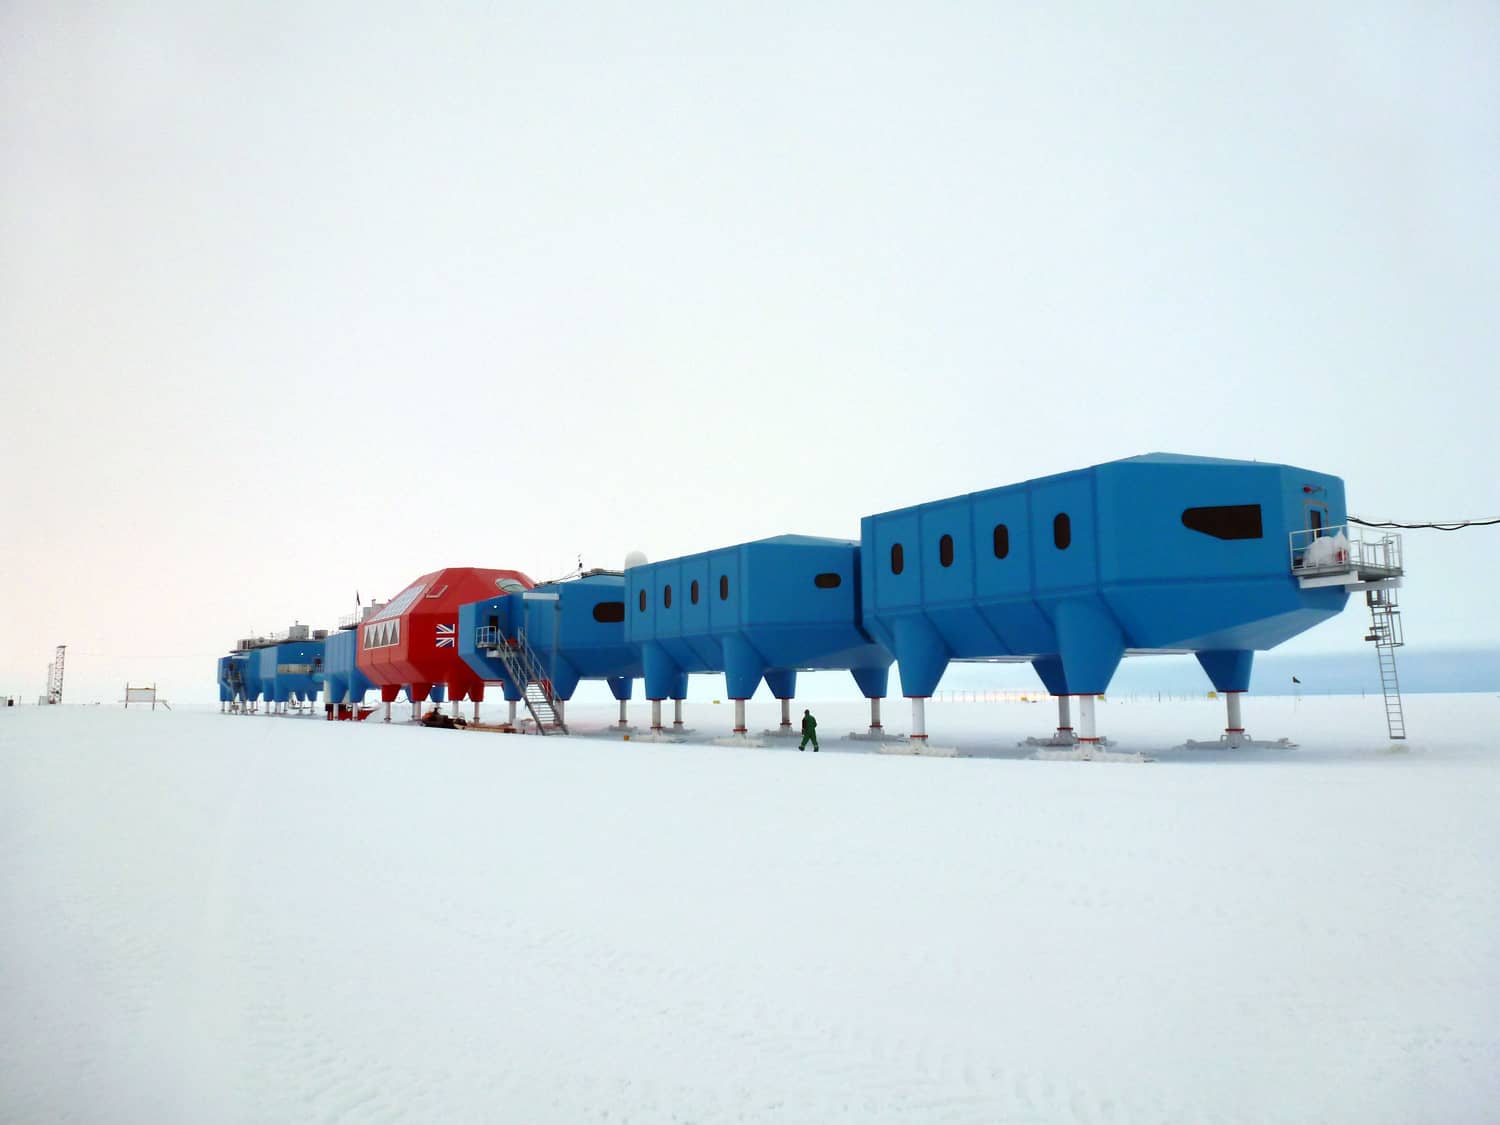 Halley research station on a clear day